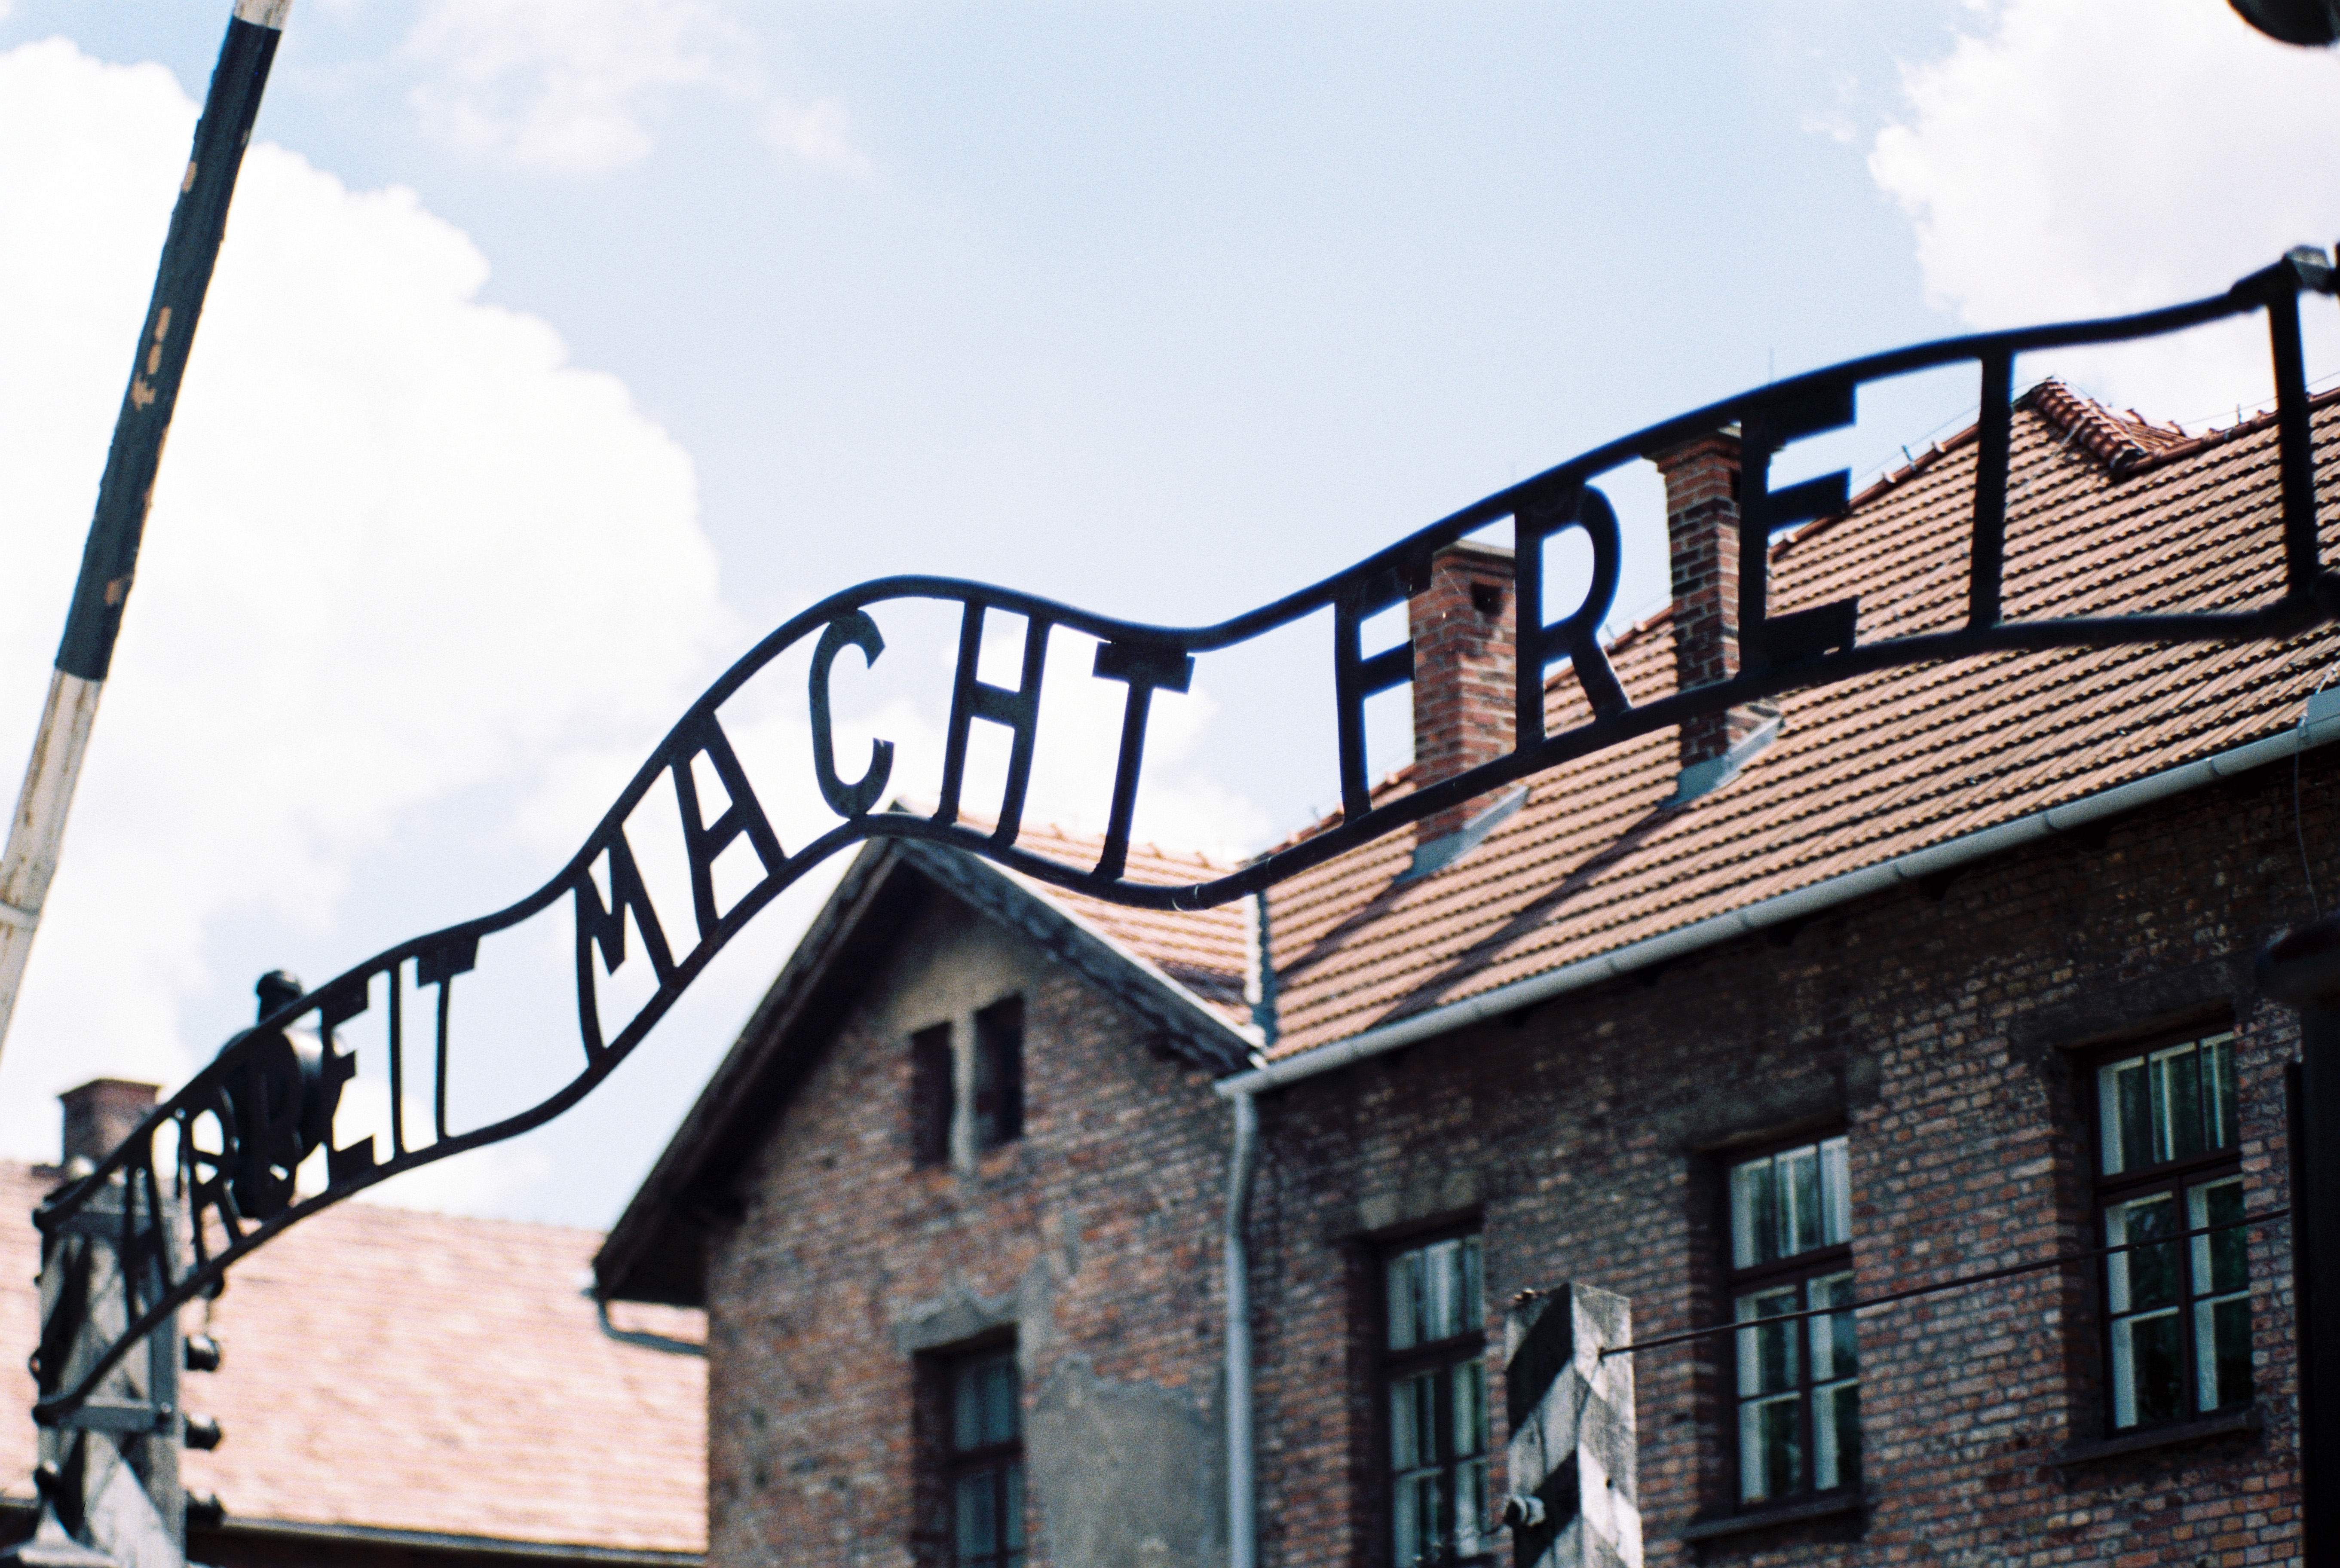 Entrance gate of the former Auschwitz concentration camp with the Scriptures "Arbeit Macht Frei" Eingangstor des ehemaligen Konzentrationslagers Auschwitz mit der Schrift "Arbeit Macht Frei"